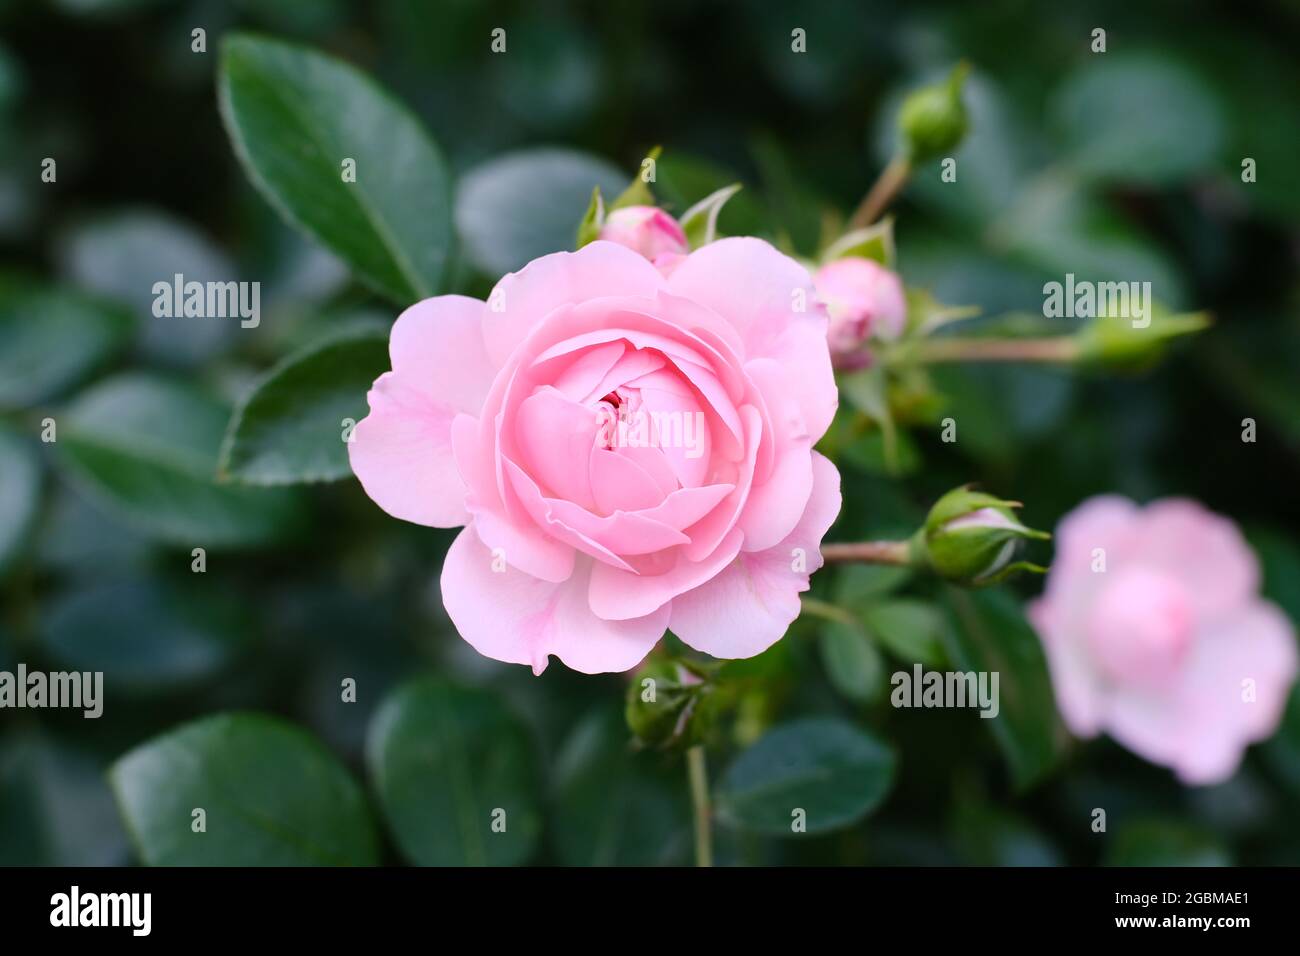 Focused pink rose (rosa luciae) in front of green blurred foliage Stock Photo